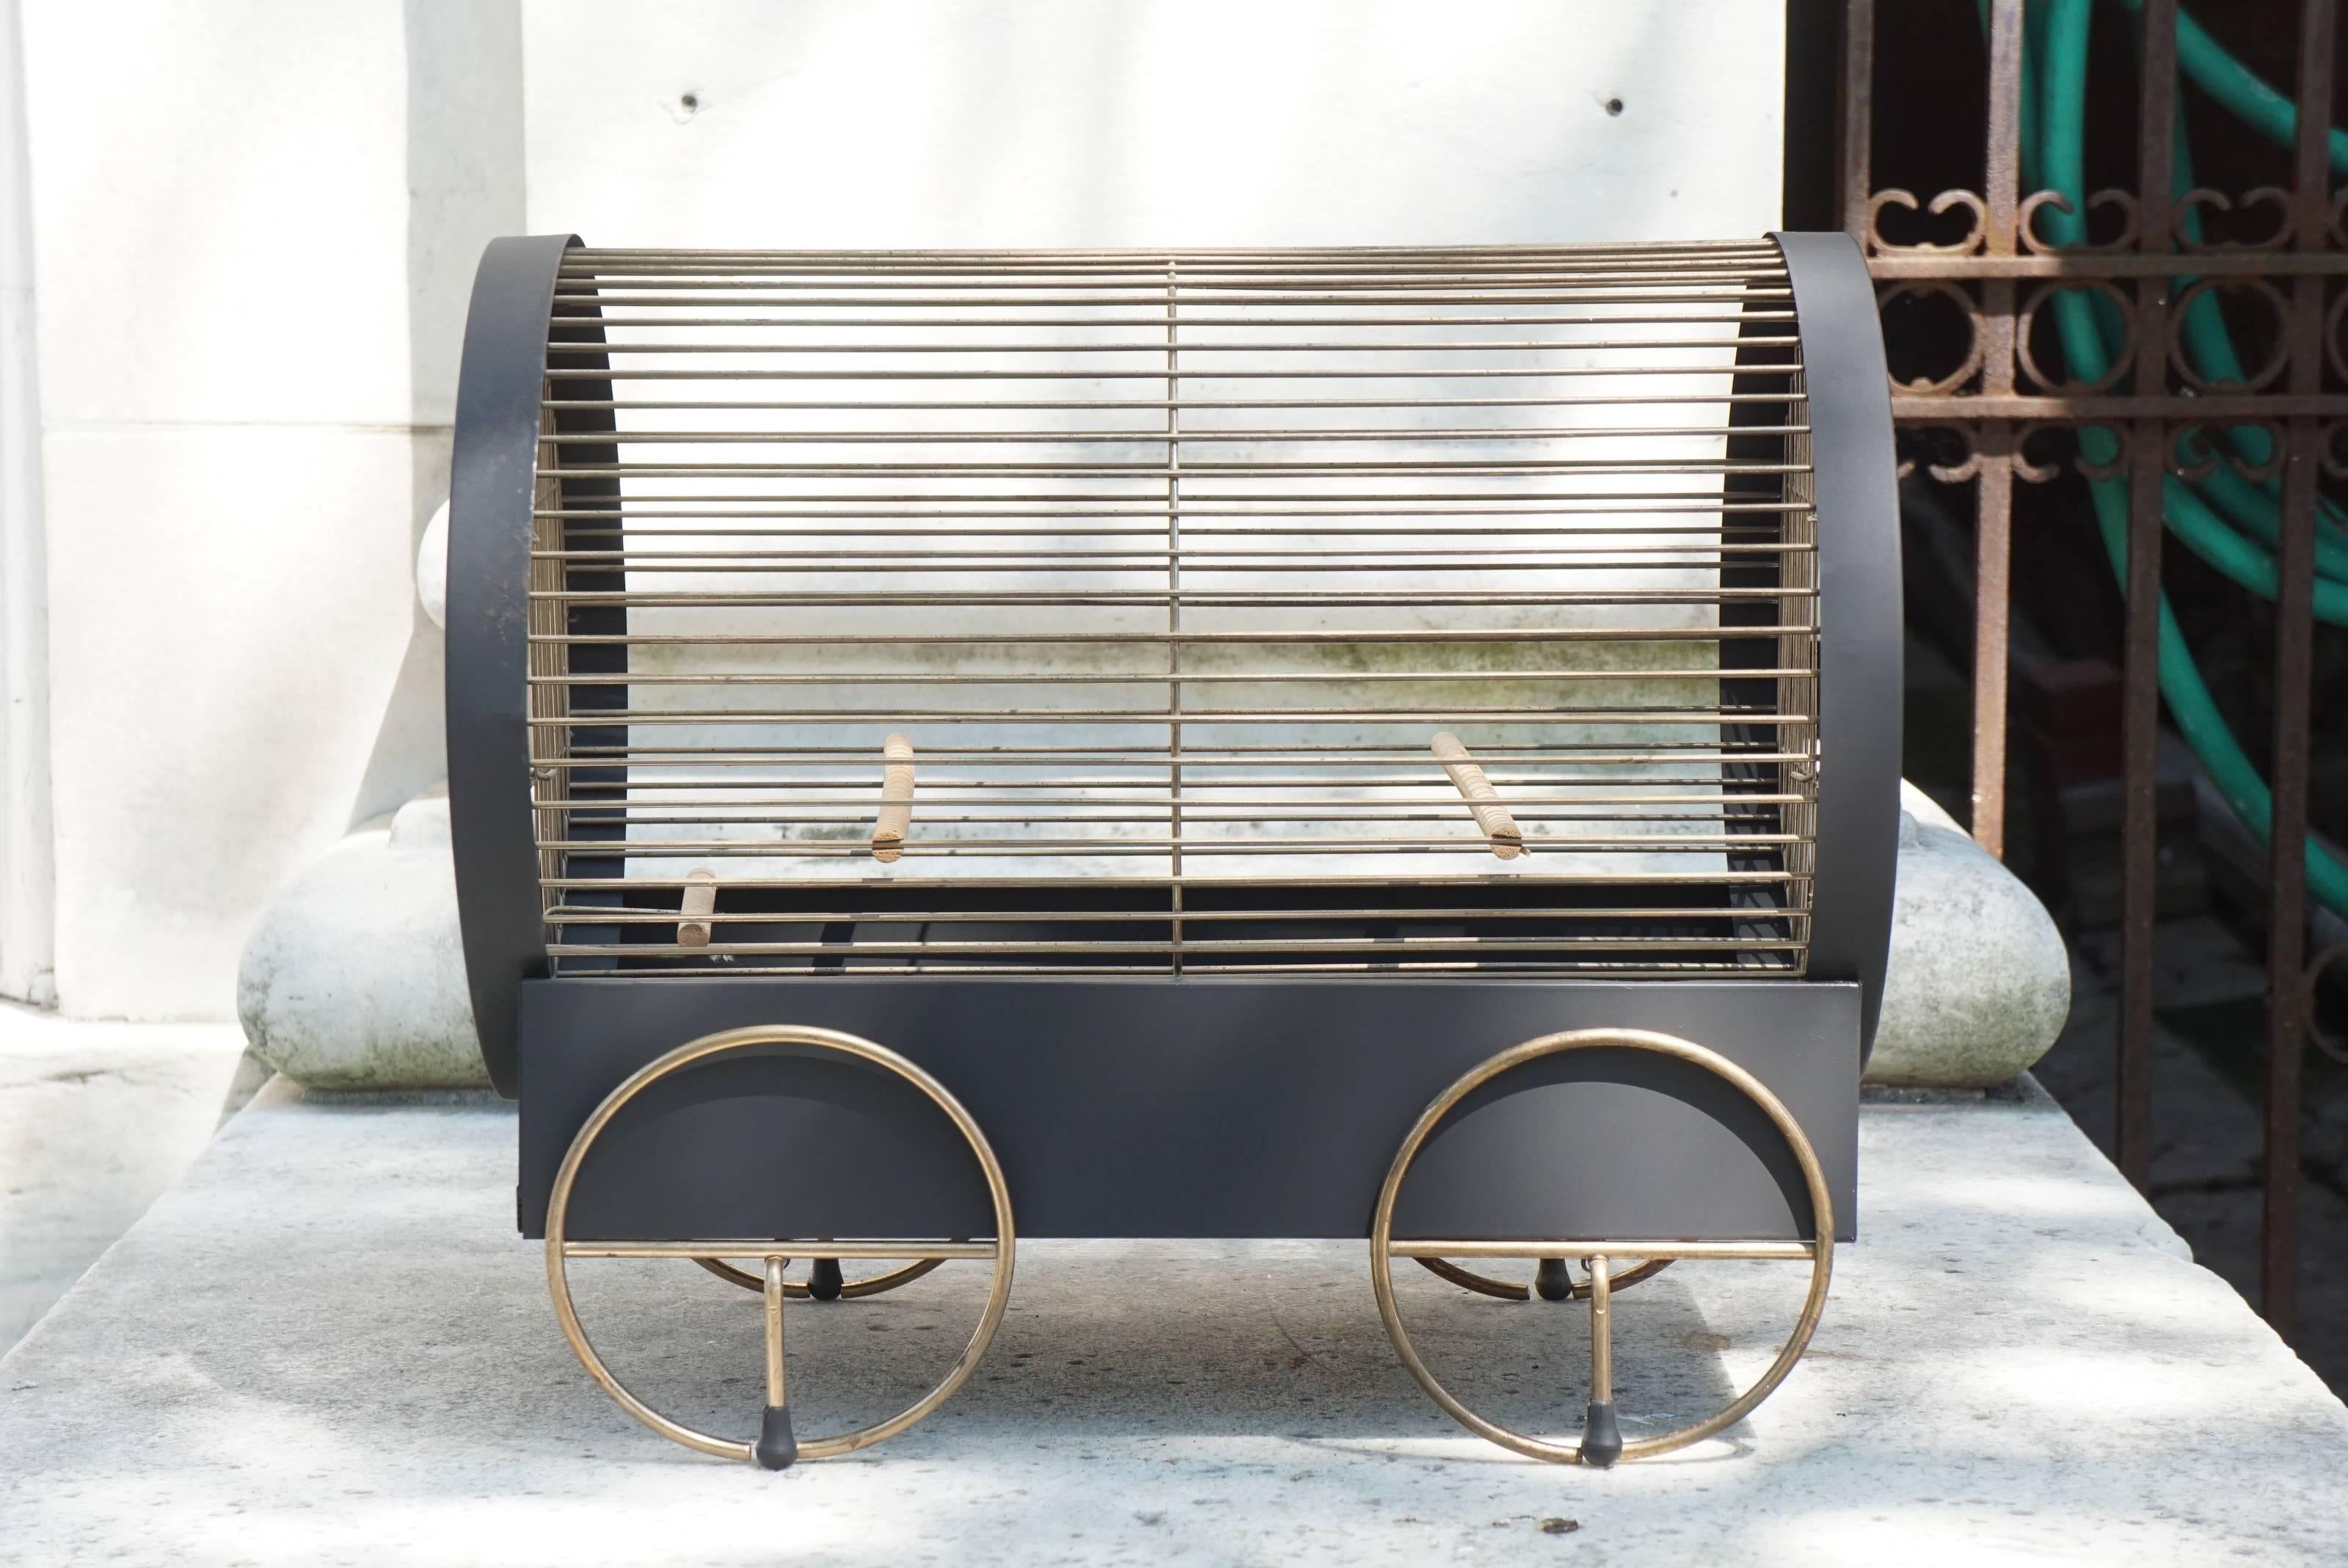 This very fun vintage bird cage for small birds such as parakeets was made in America in the late 1950s. Made from painted steel framing and brass trim the cage is a great decorative accessory with or without a bird. In the form of a covered wagon